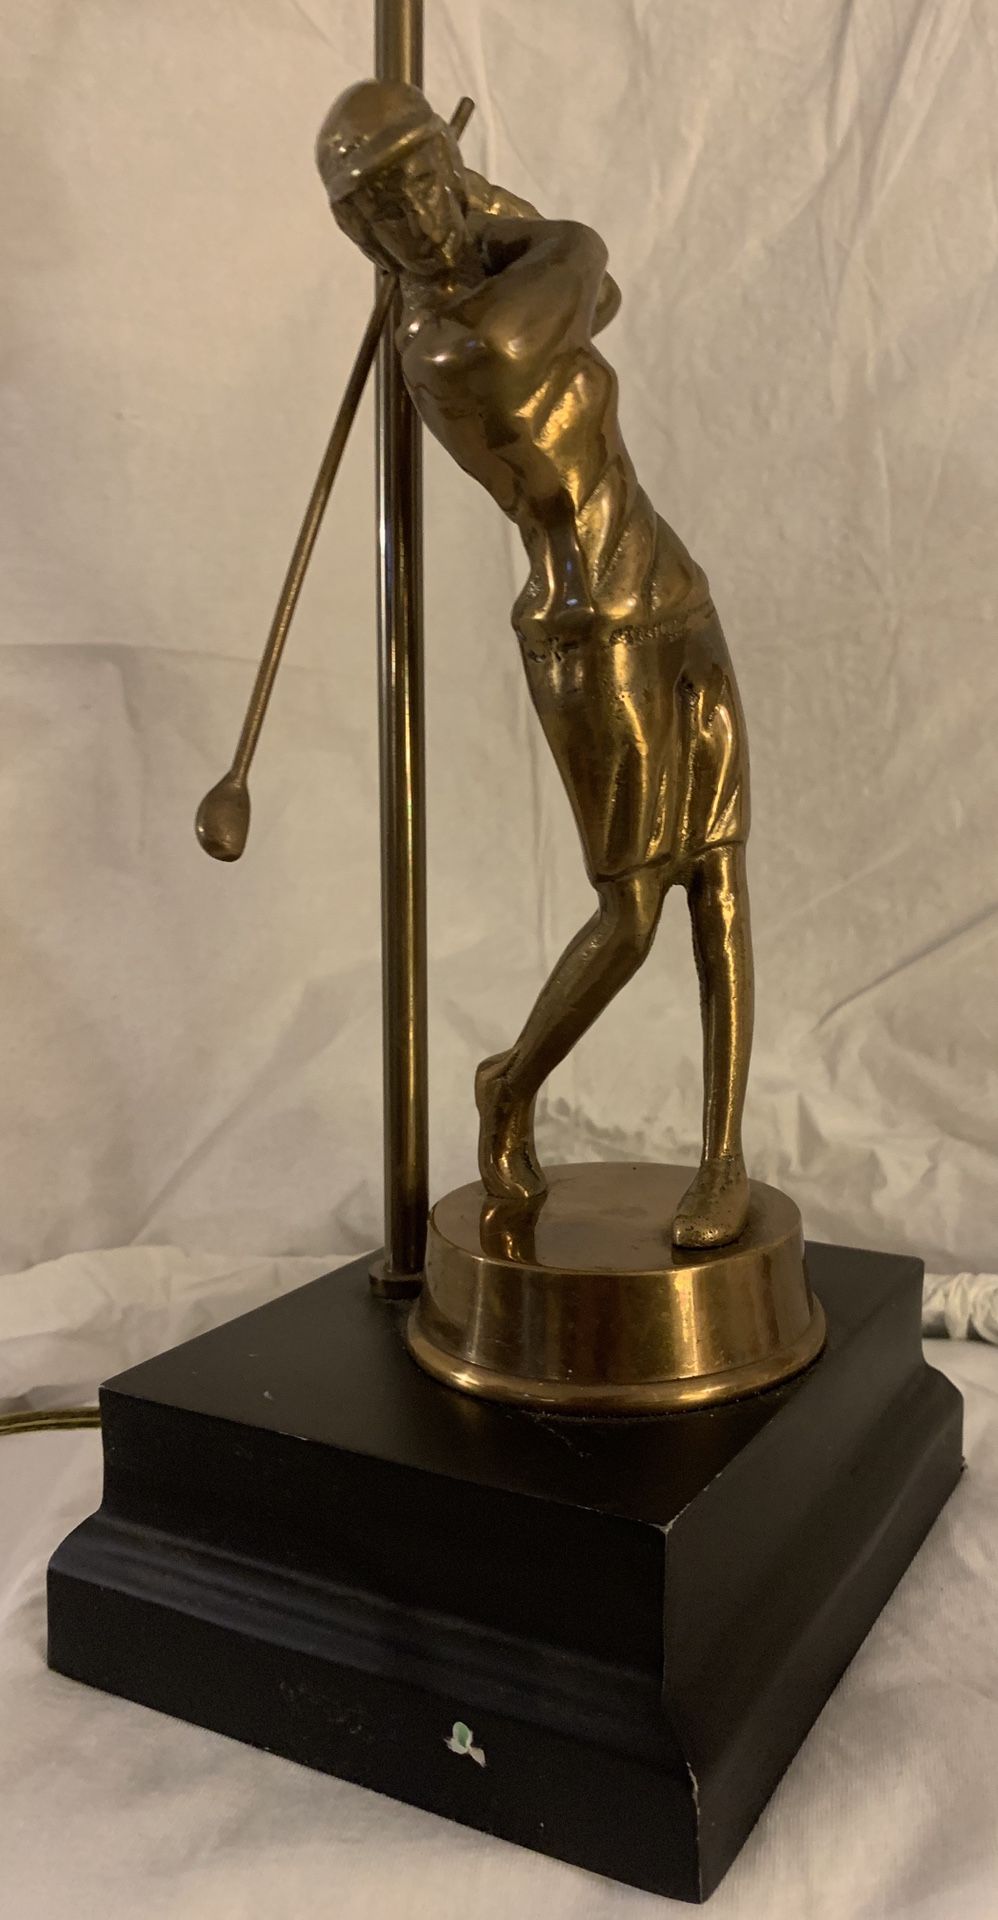 The Phoenix Collection Tall Brass Golfer Statue Lamp with biege Shade and Brass Finial; Used Vintage